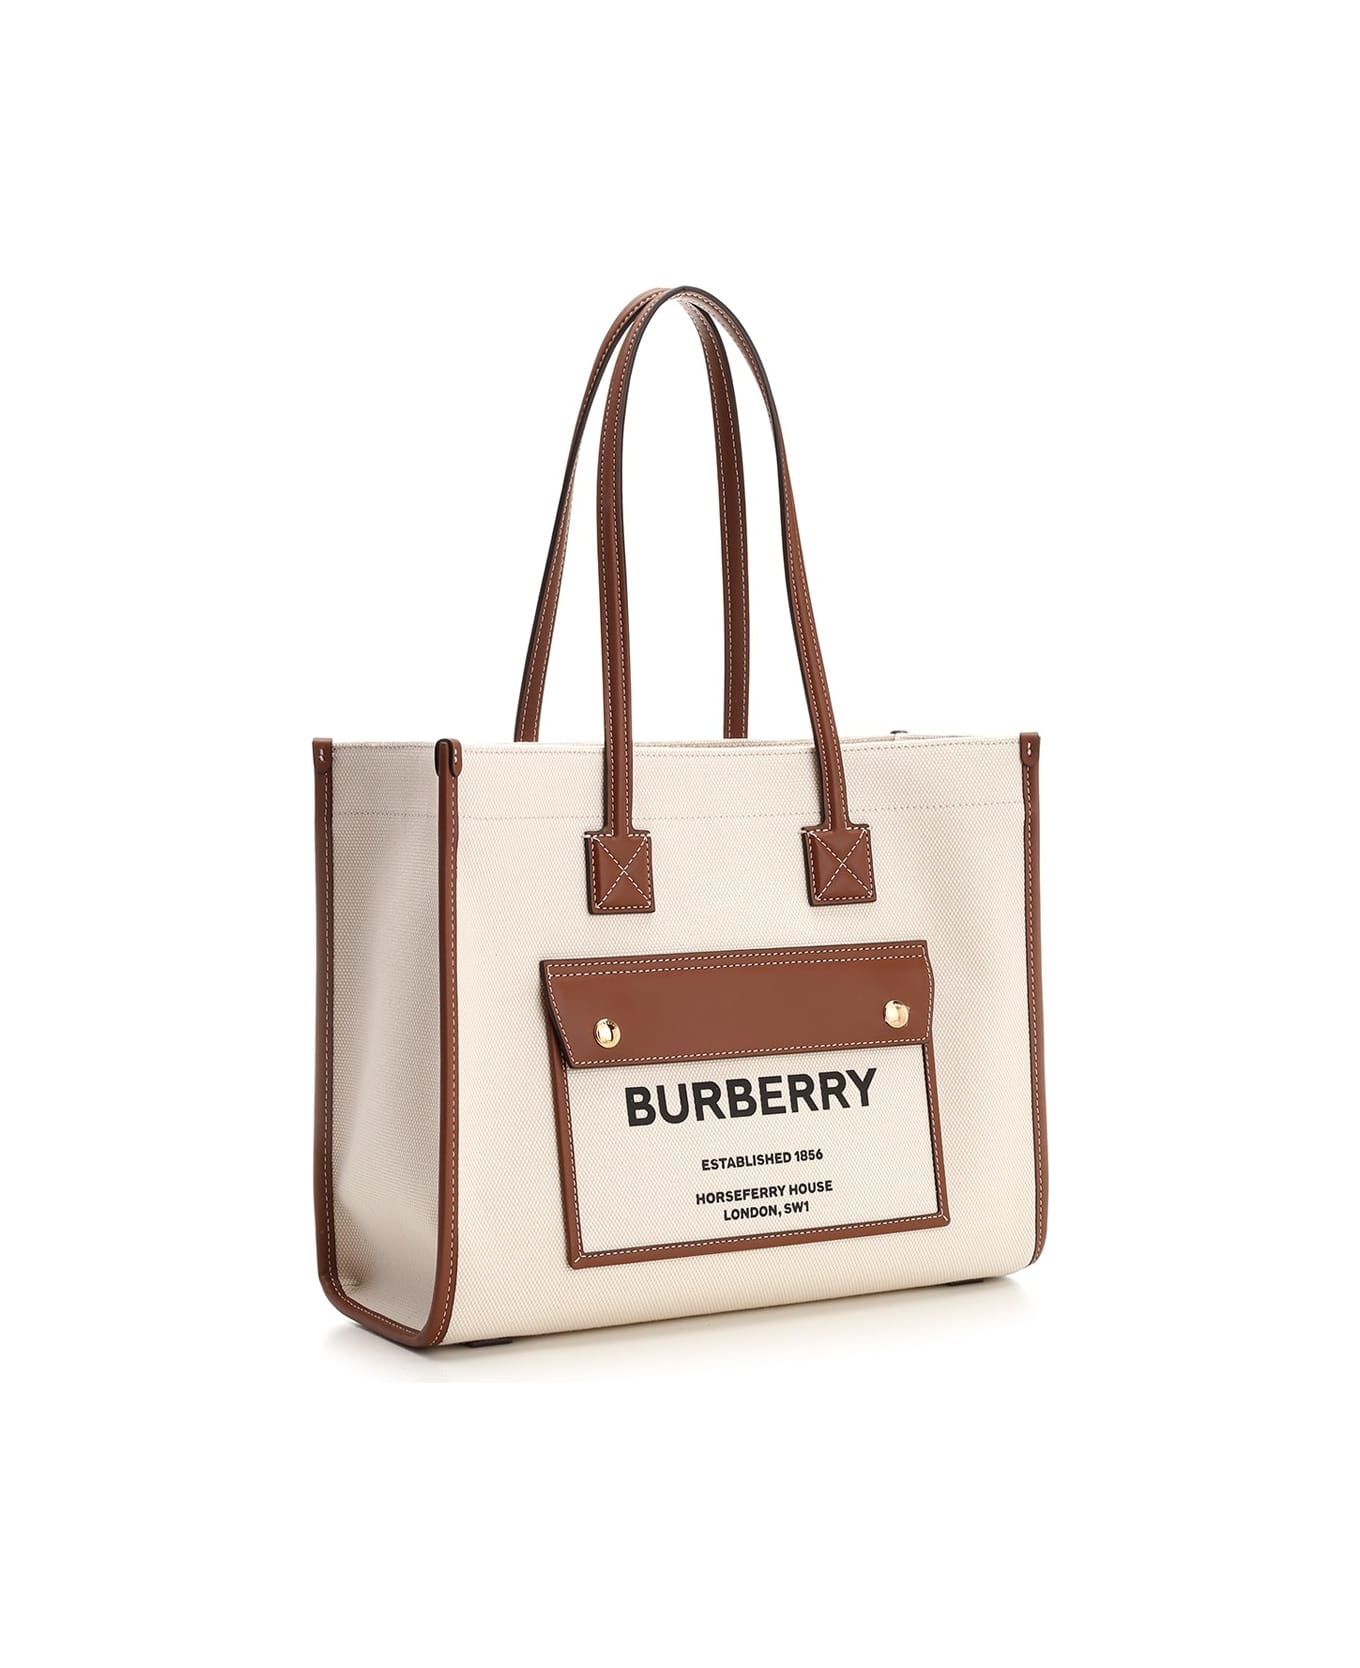 Burberry Tote Bag In Canvas - White